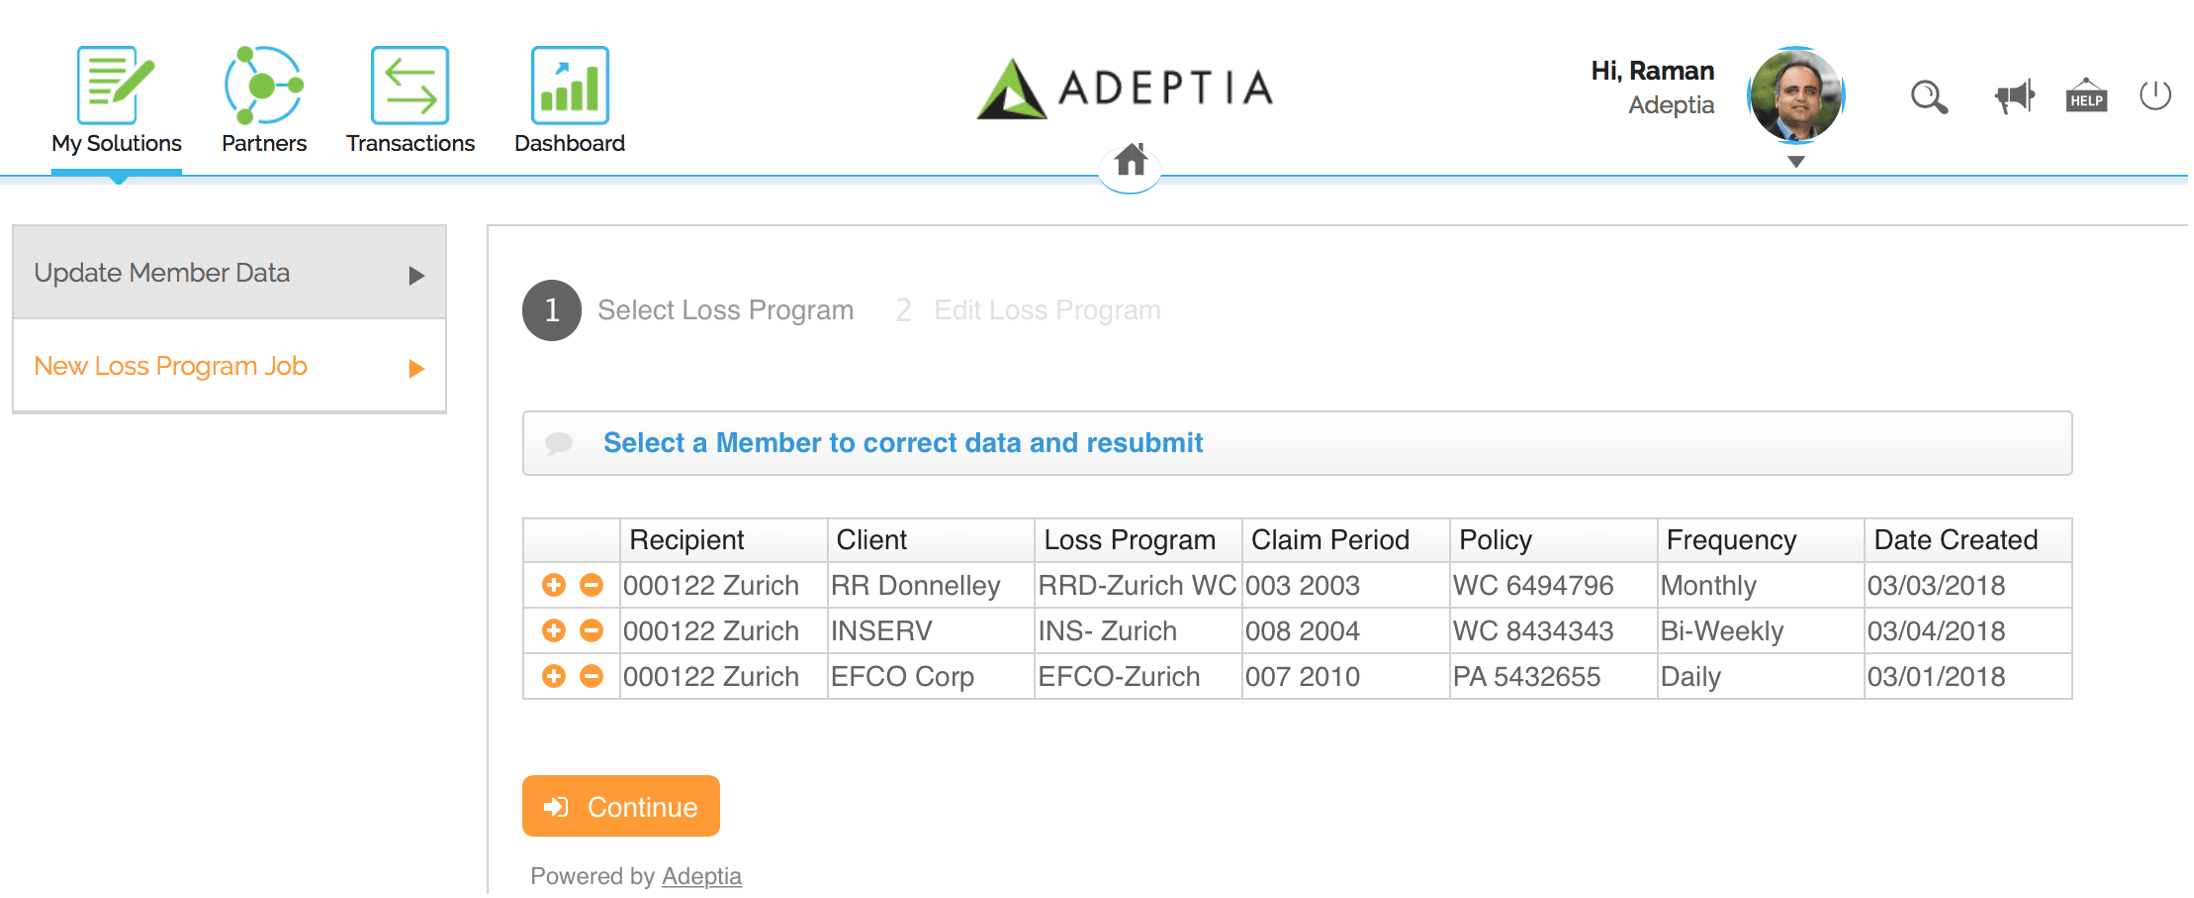 Adeptia Connect in action